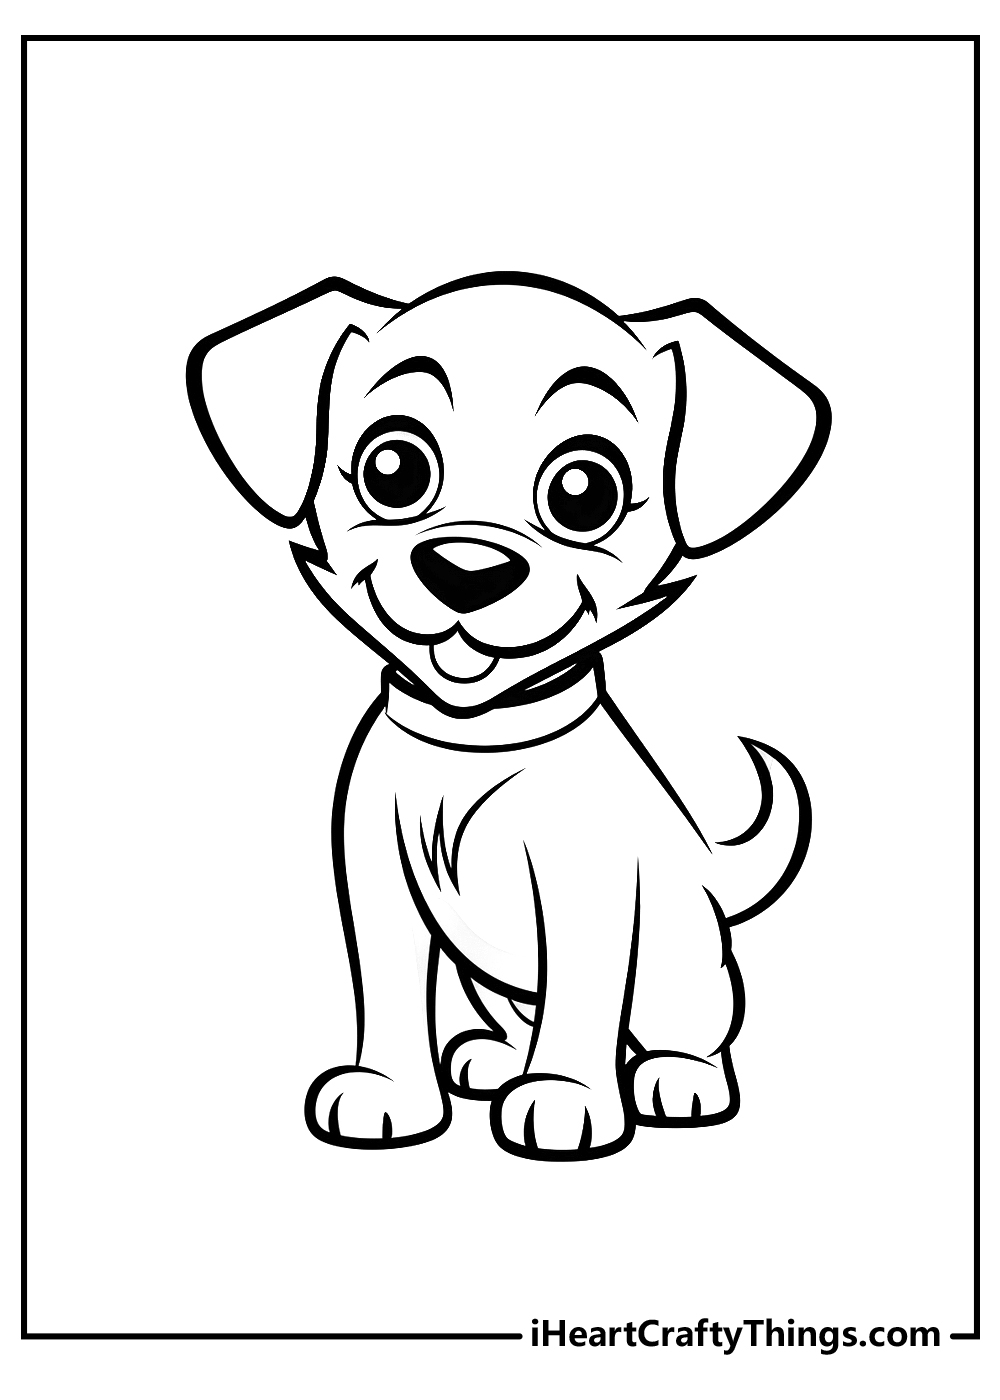 Dog coloring pages free printables